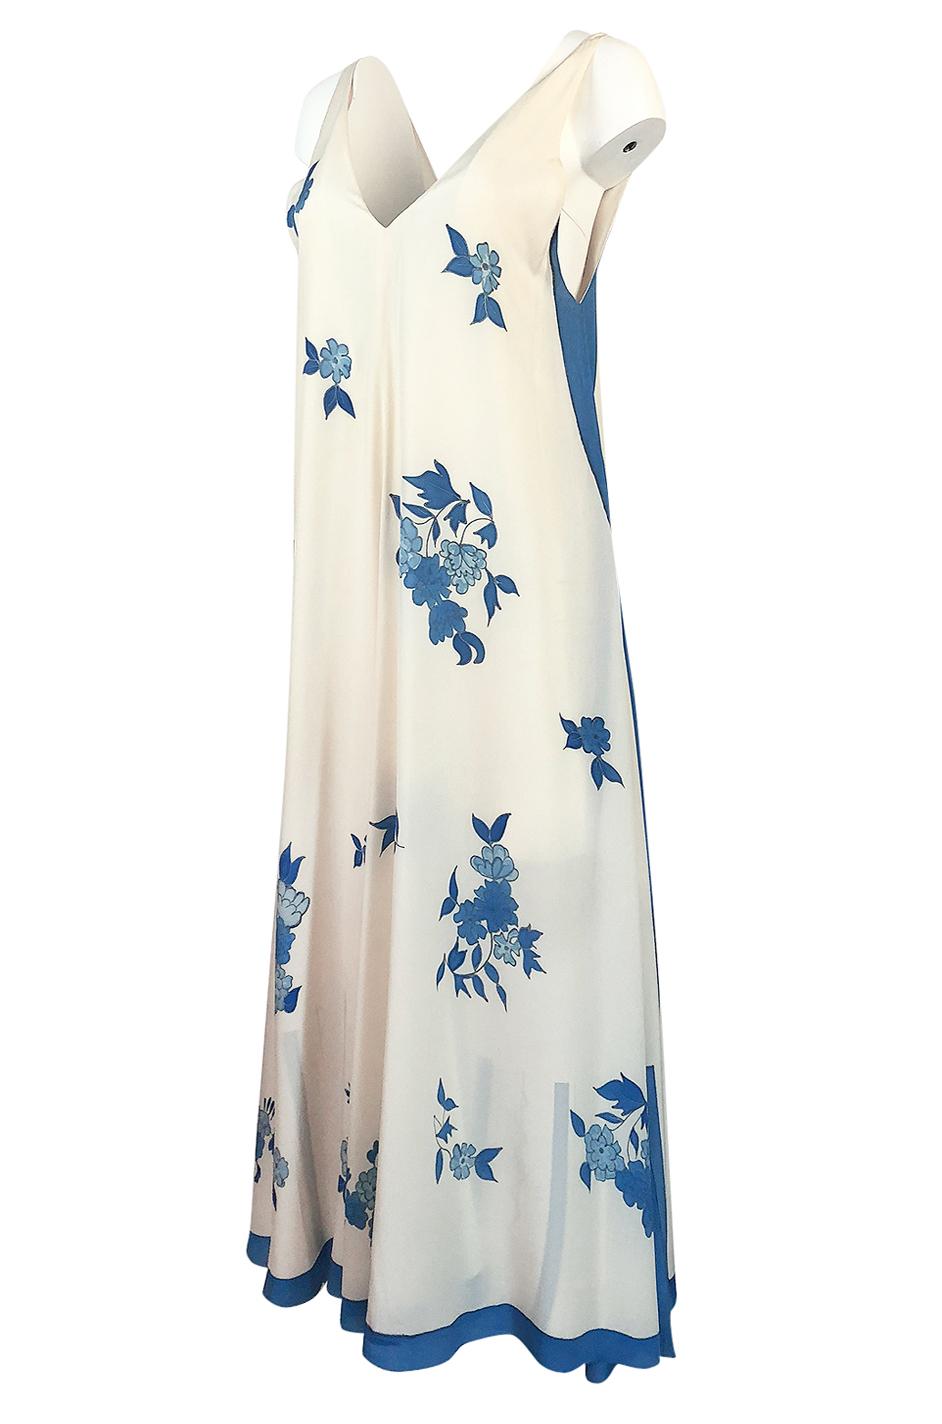 Karl Lagerfeld for Chloe Blue Floral Print Silk Print Dress and Capelet, c 1974 1